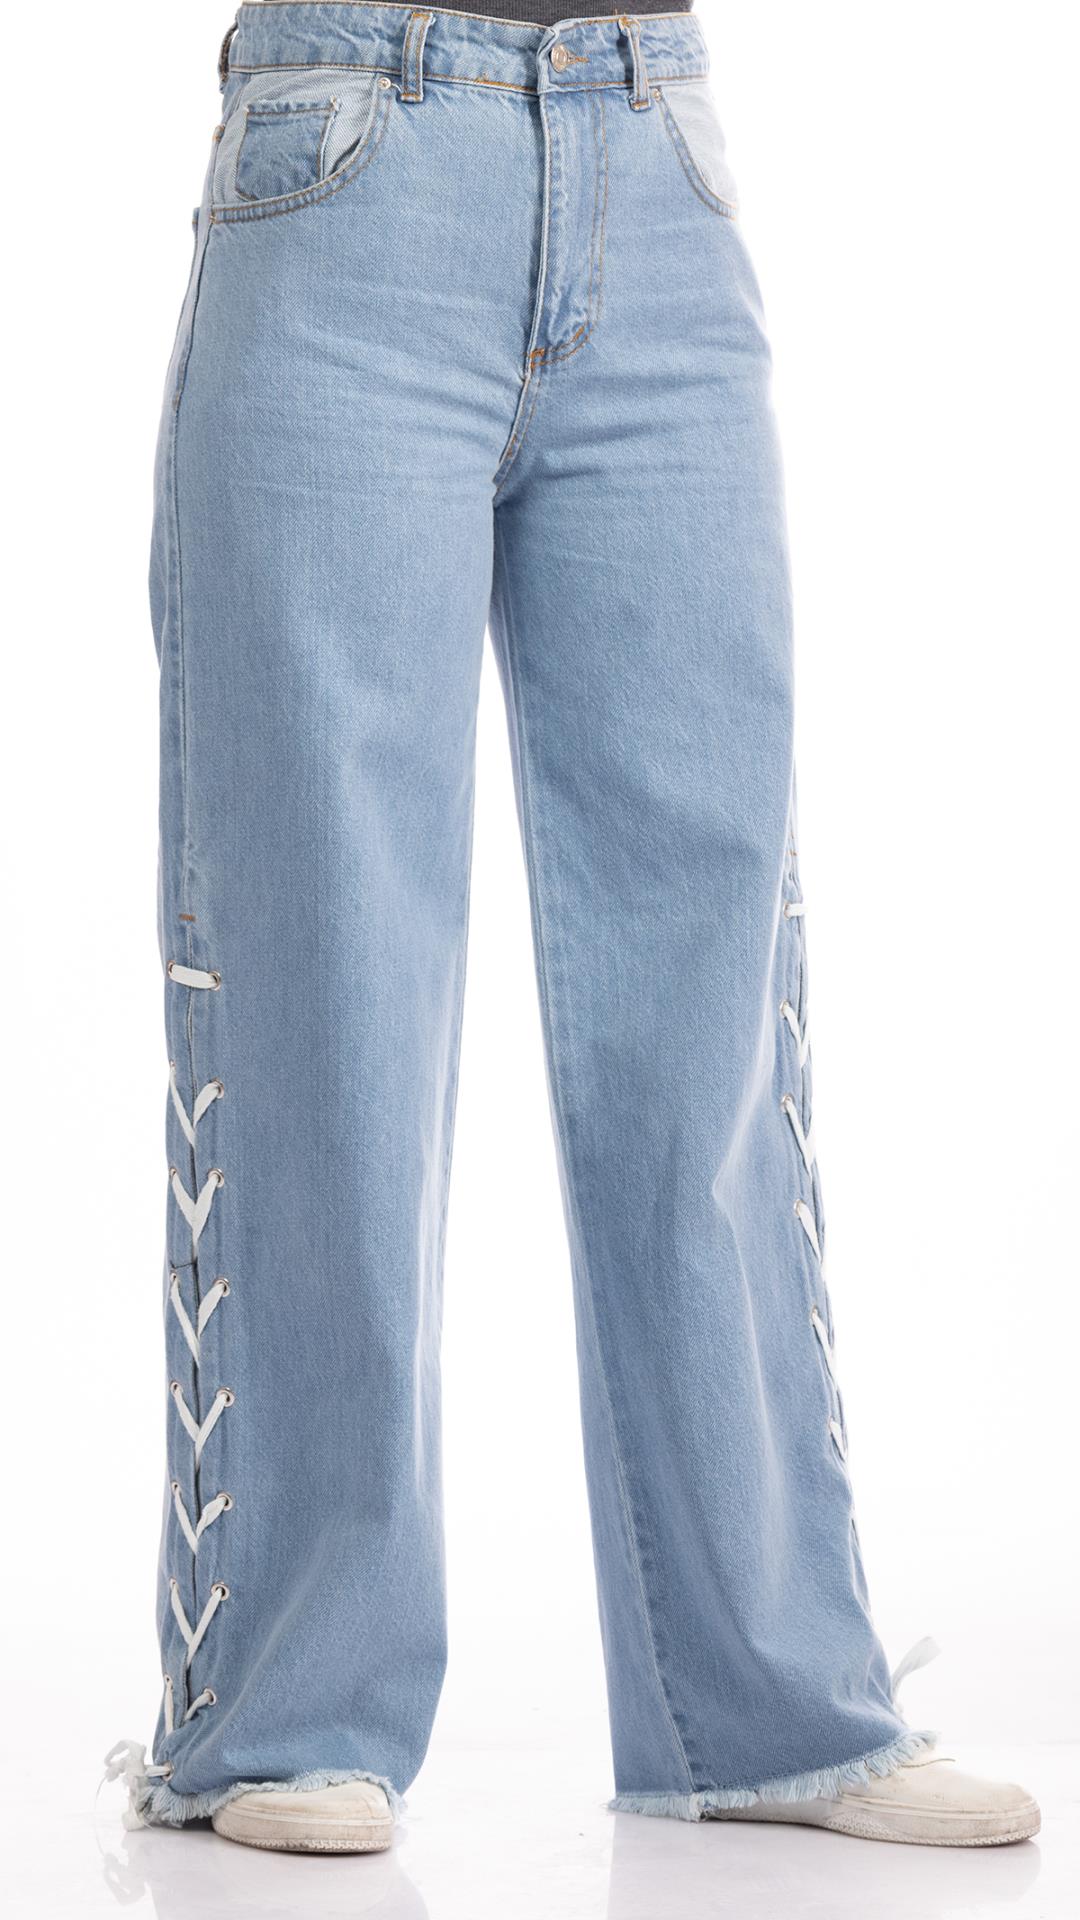 Jeans with drawstring detail on the bottom 